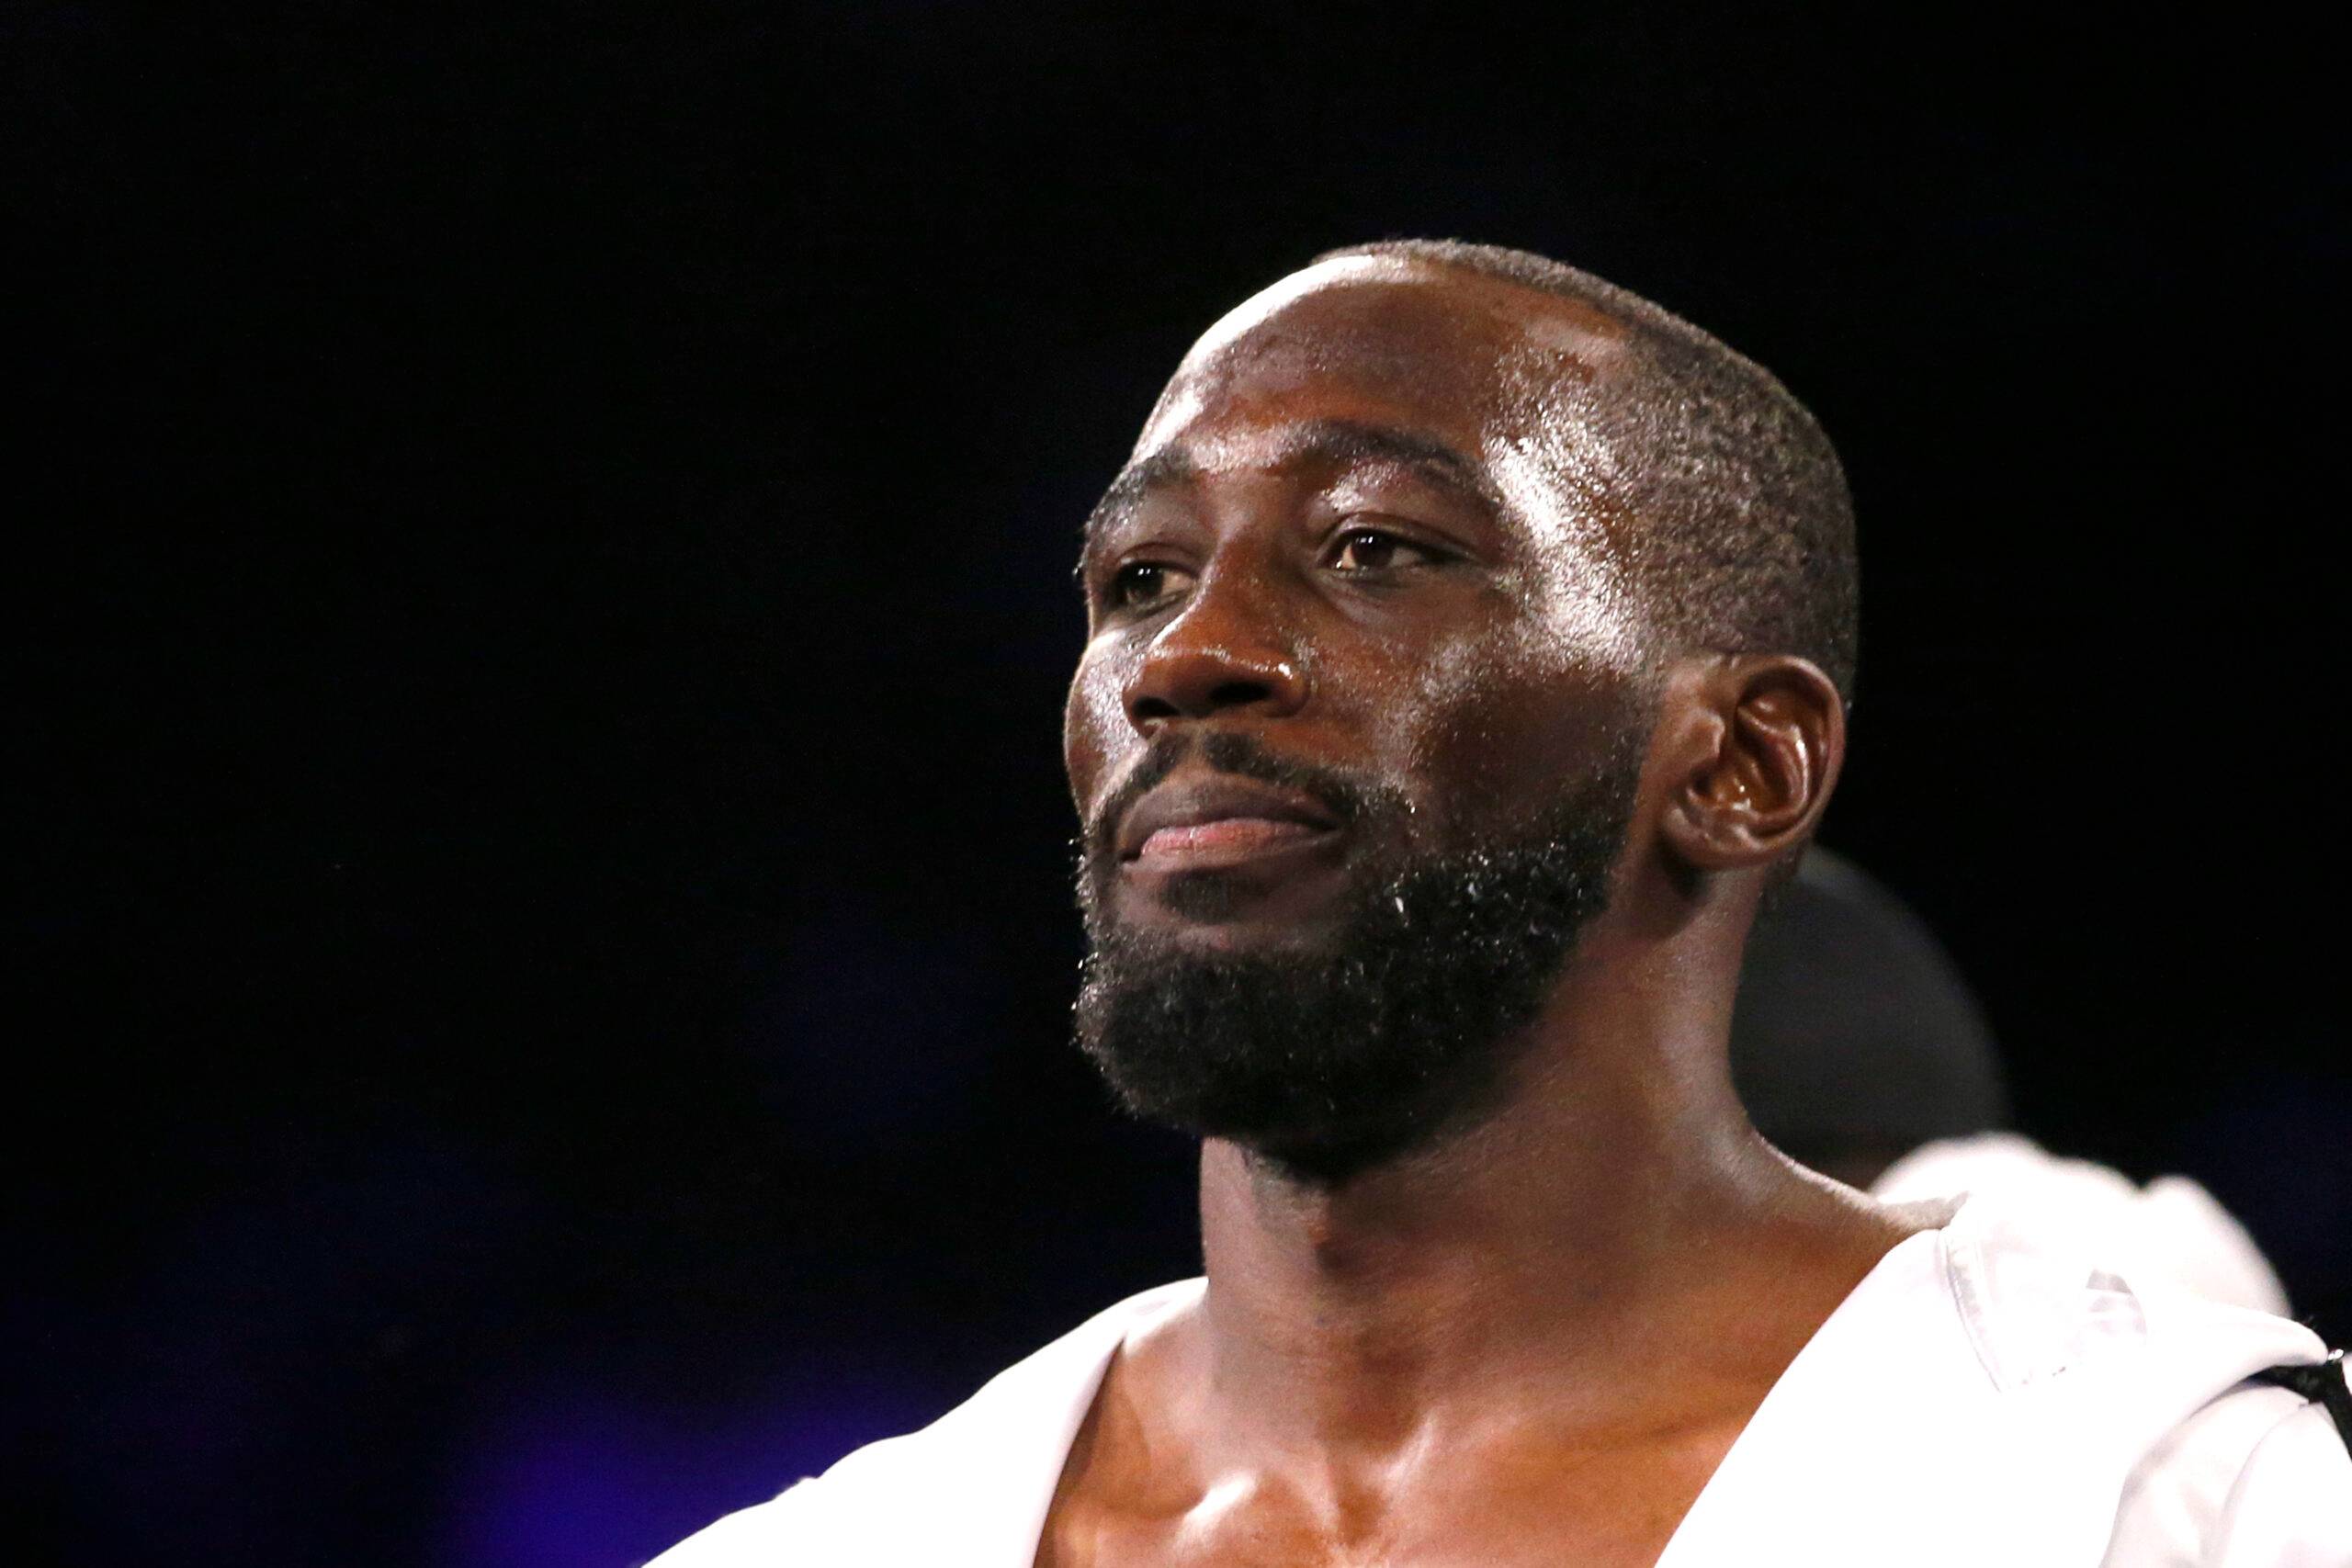 Terence Crawford has confirmed he will step back in the ring in December to defend his welterweight title